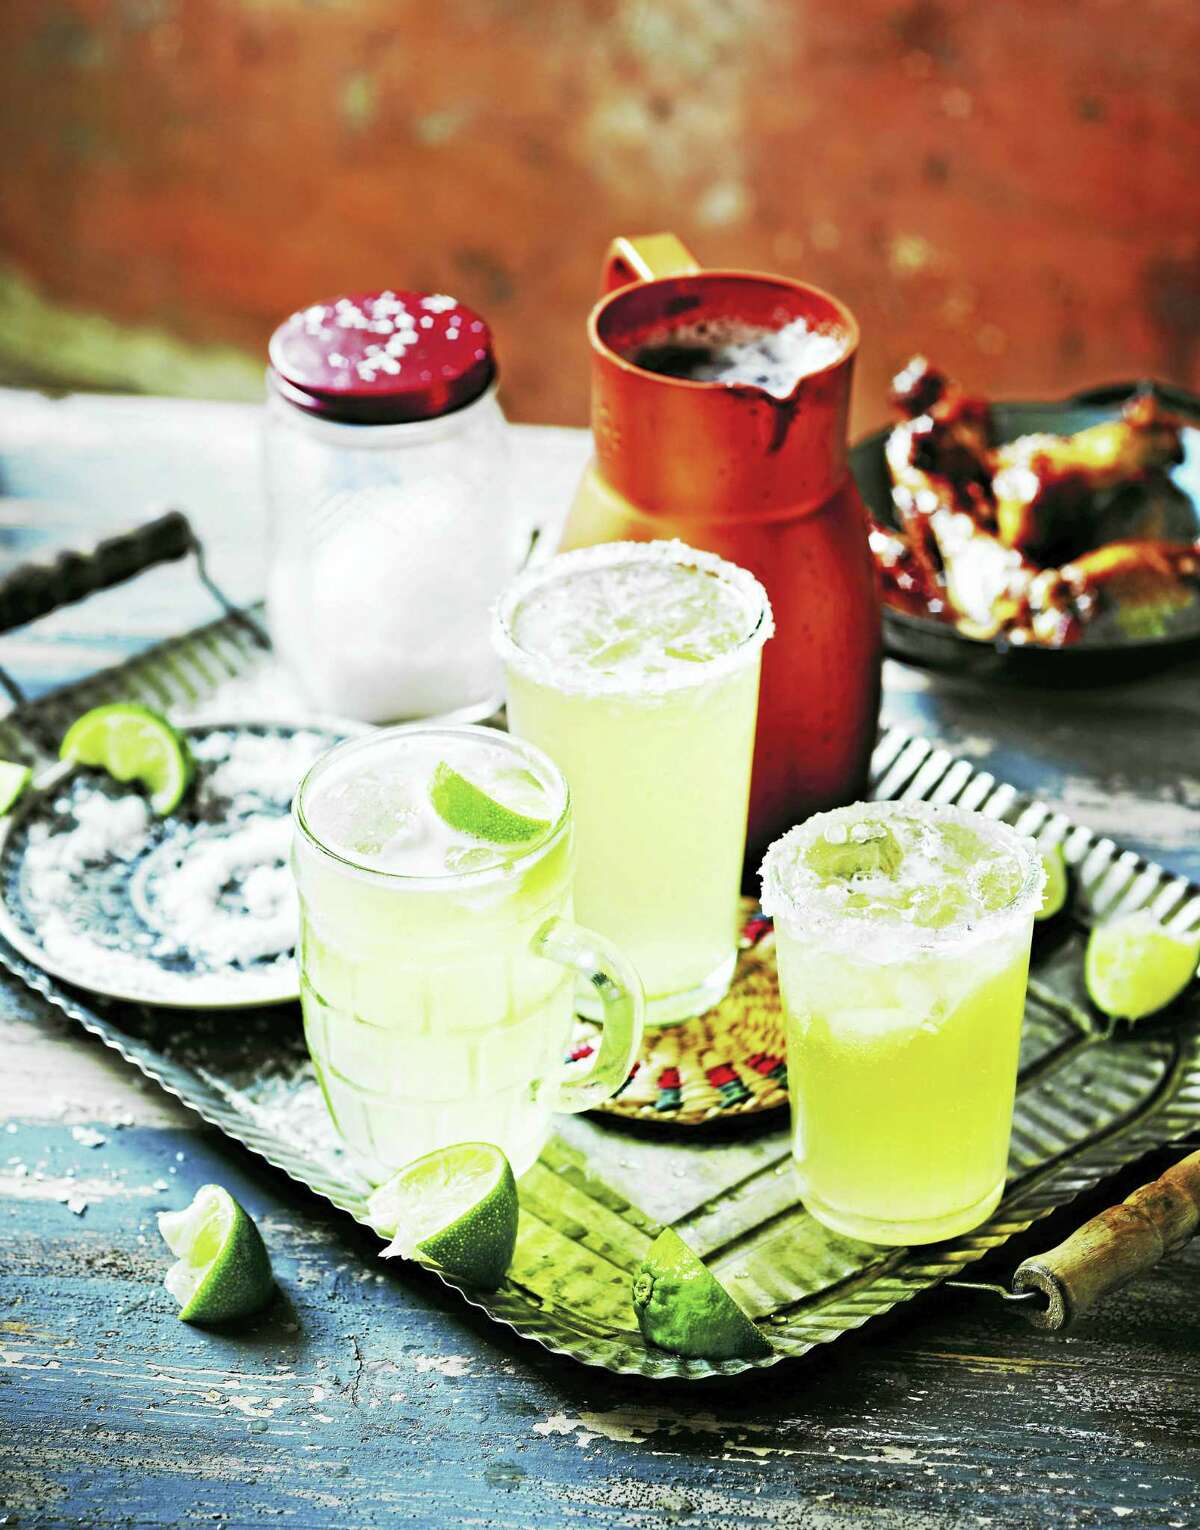 A beer margarita is a refreshing complement for any style of chicken wings.